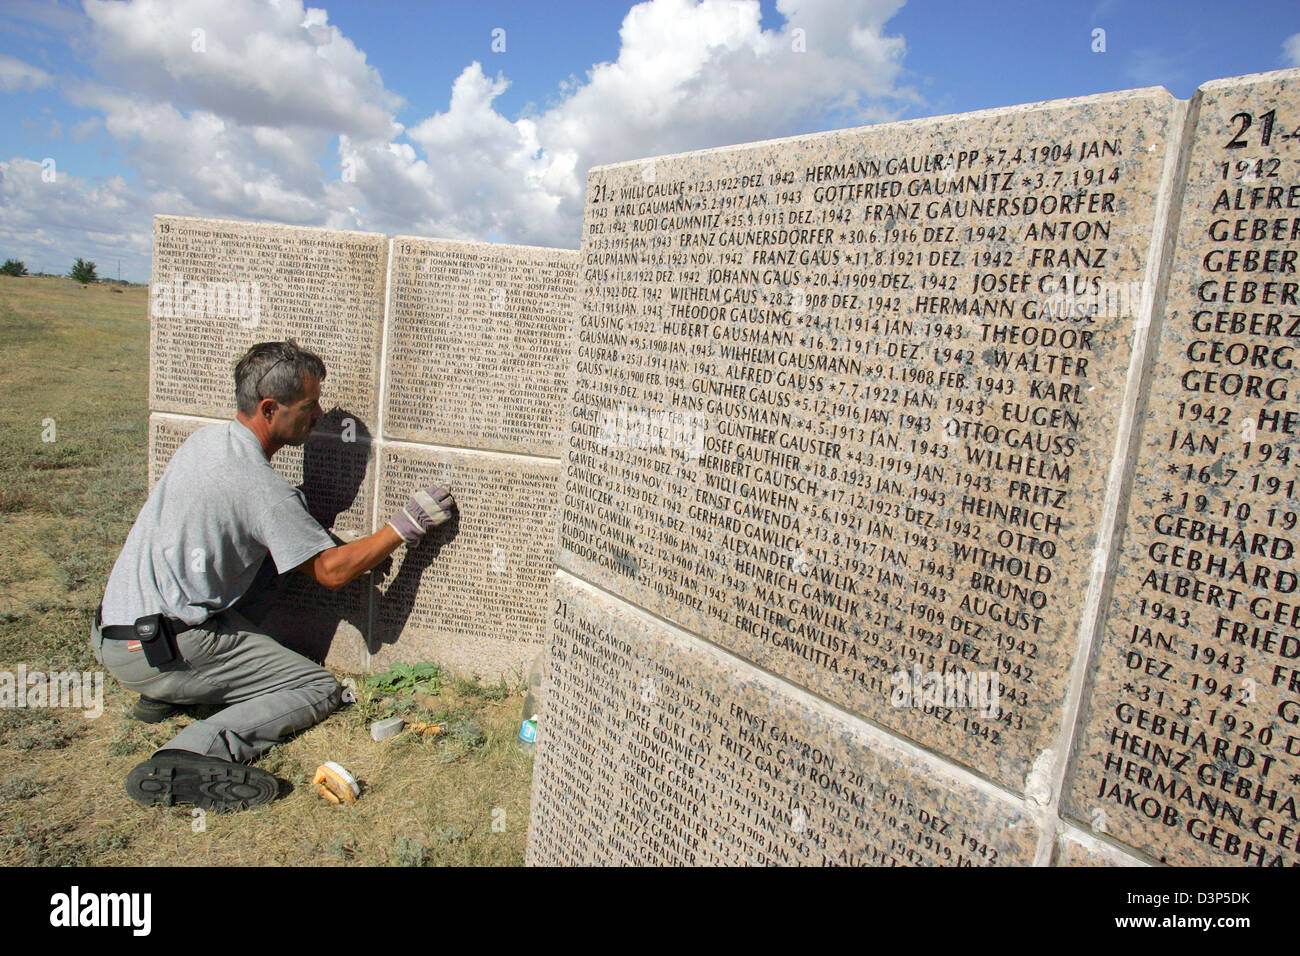 Valery Ilin cleans a granitic cube reading the names of the German WWII soldiers missing in action at the military cemetary Rossoshka near Volgograd, Russia, Friday, 08 September 2006. The names of more than 100,000 WWII soldiers missing in action since the Battle of Stalingrad are engraved to the 107 granitic cubes. The memorial place constructed by the German war graves agency 'V Stock Photo